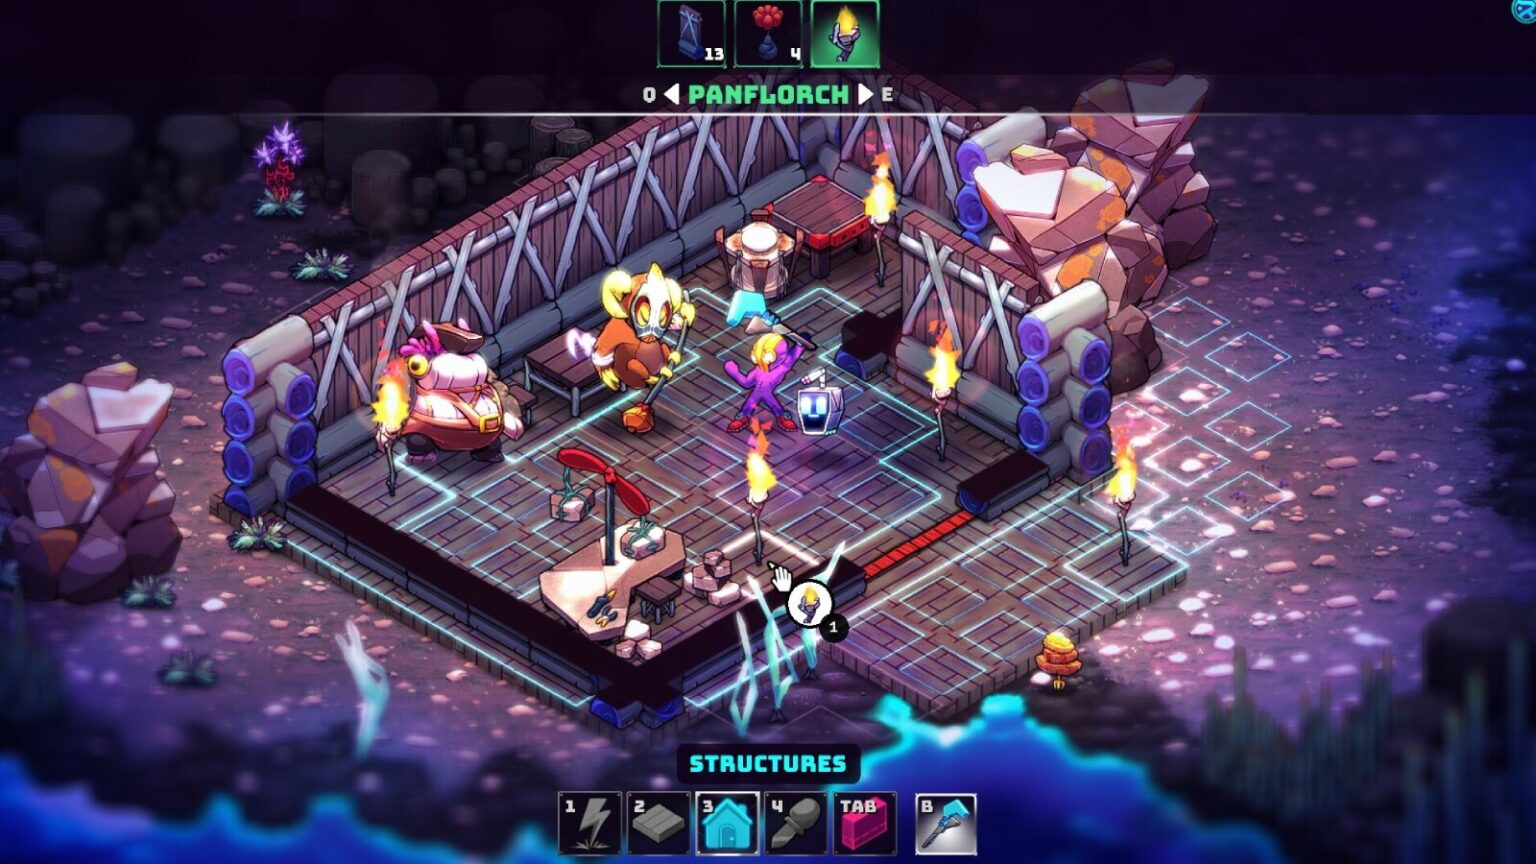 Colorful characters engage in Crashlands 2, vibrant isometric game setting